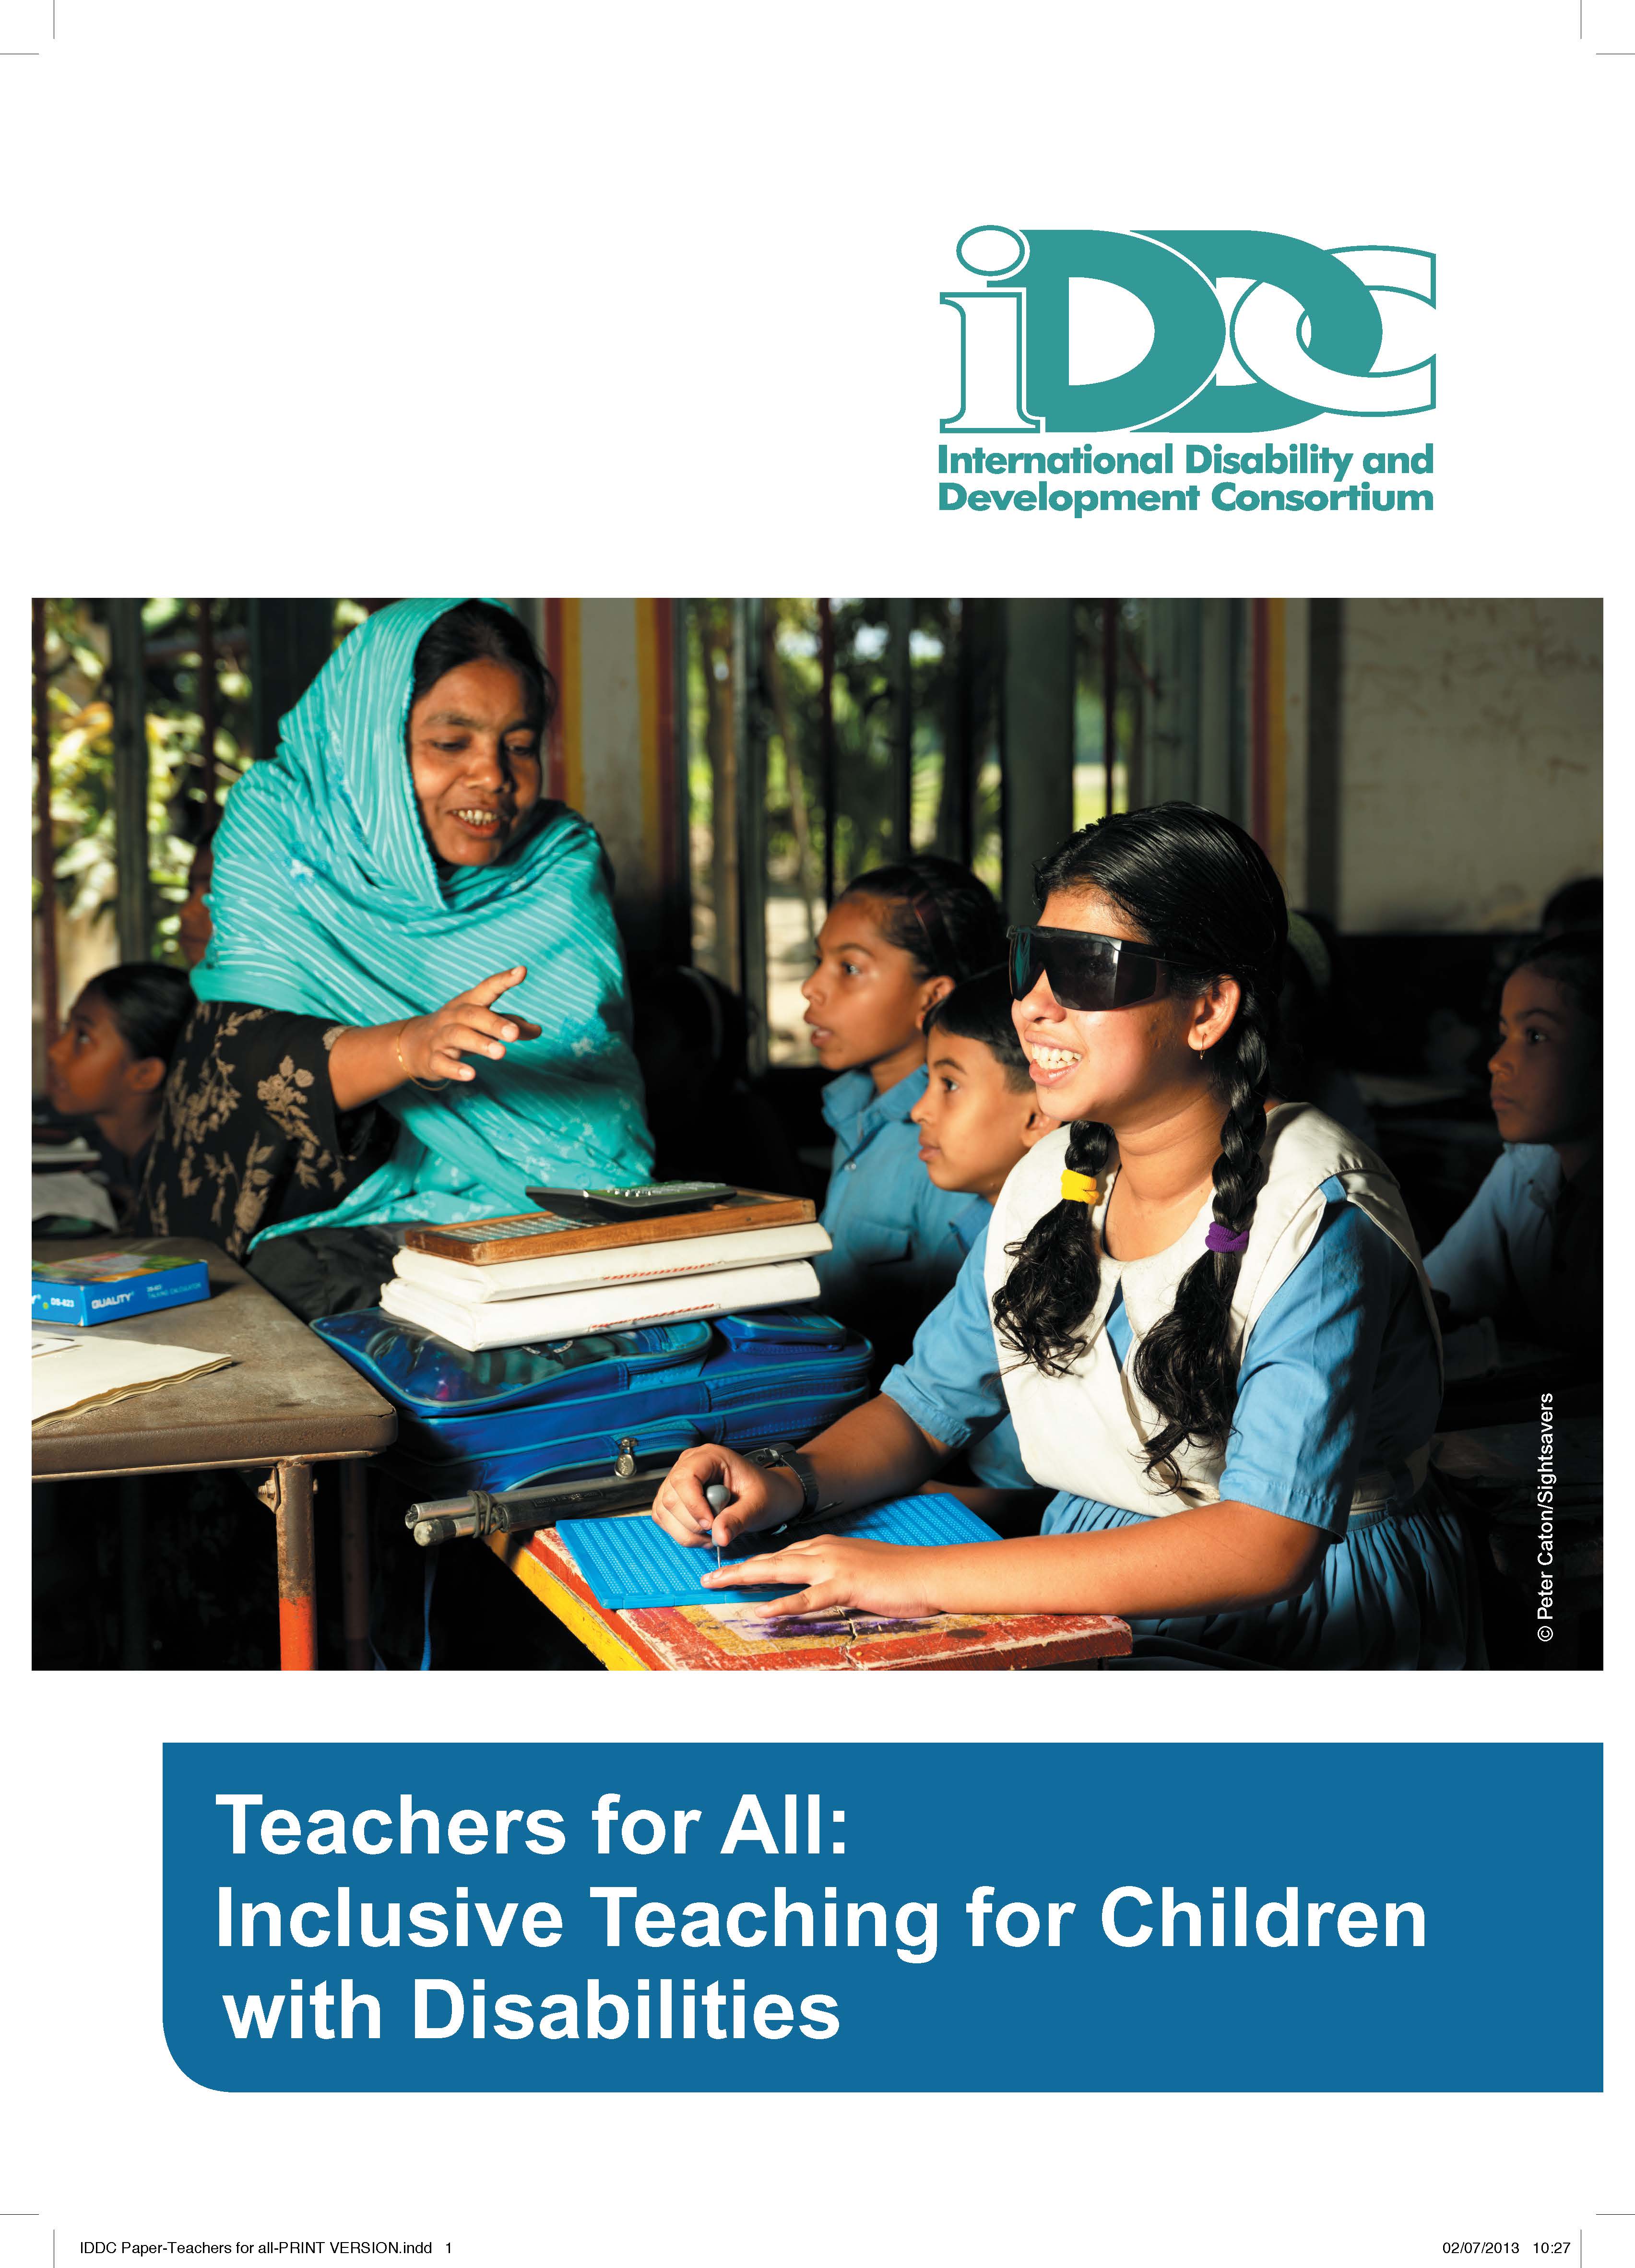 iddc_Teachers for All Inclusive Teaching for Children with Disabilities